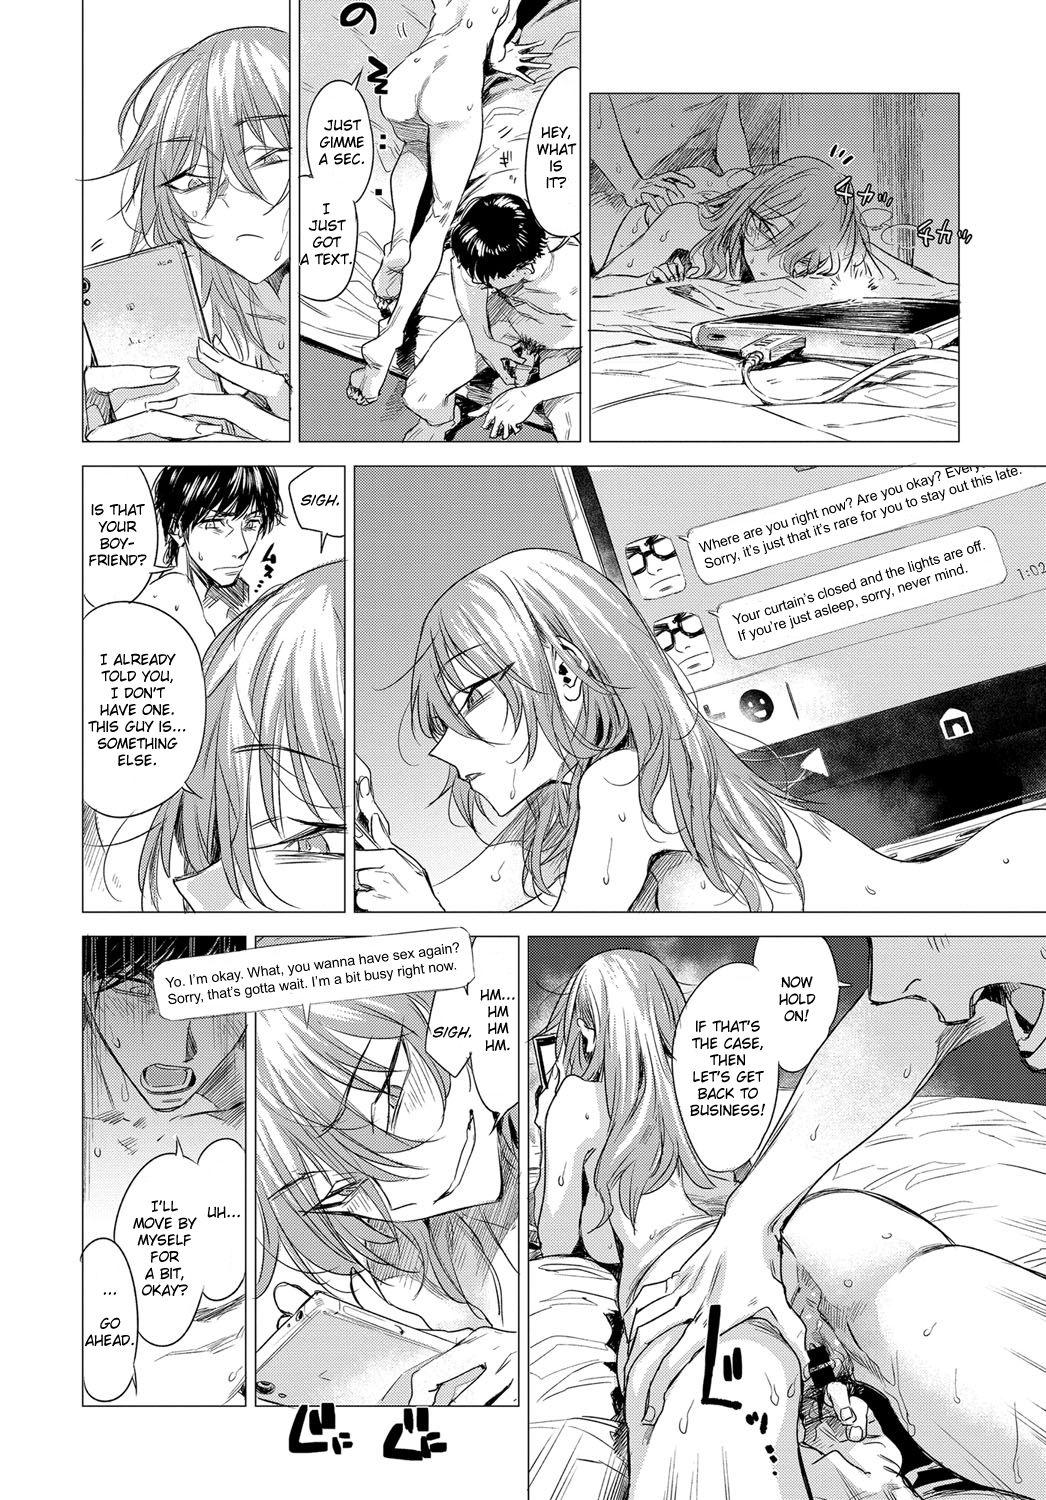 Shoplifter Sorezore no Himitsu - The Secret of Each Other Chastity - Page 12